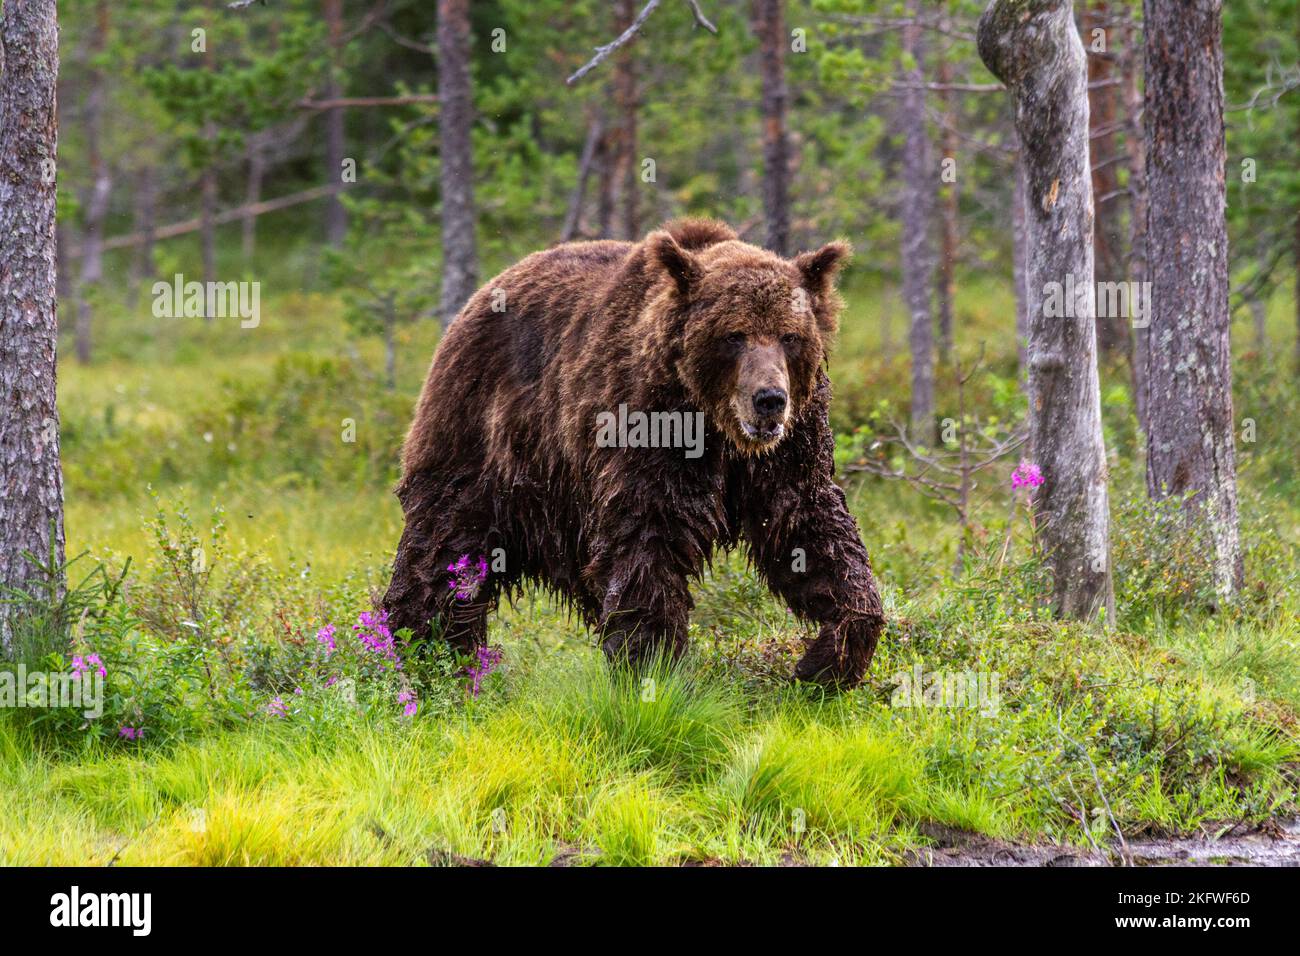 A brown bear (ursus arctos) walking in the wild around the flowers in Kuhmo, Eastern Finland Stock Photo